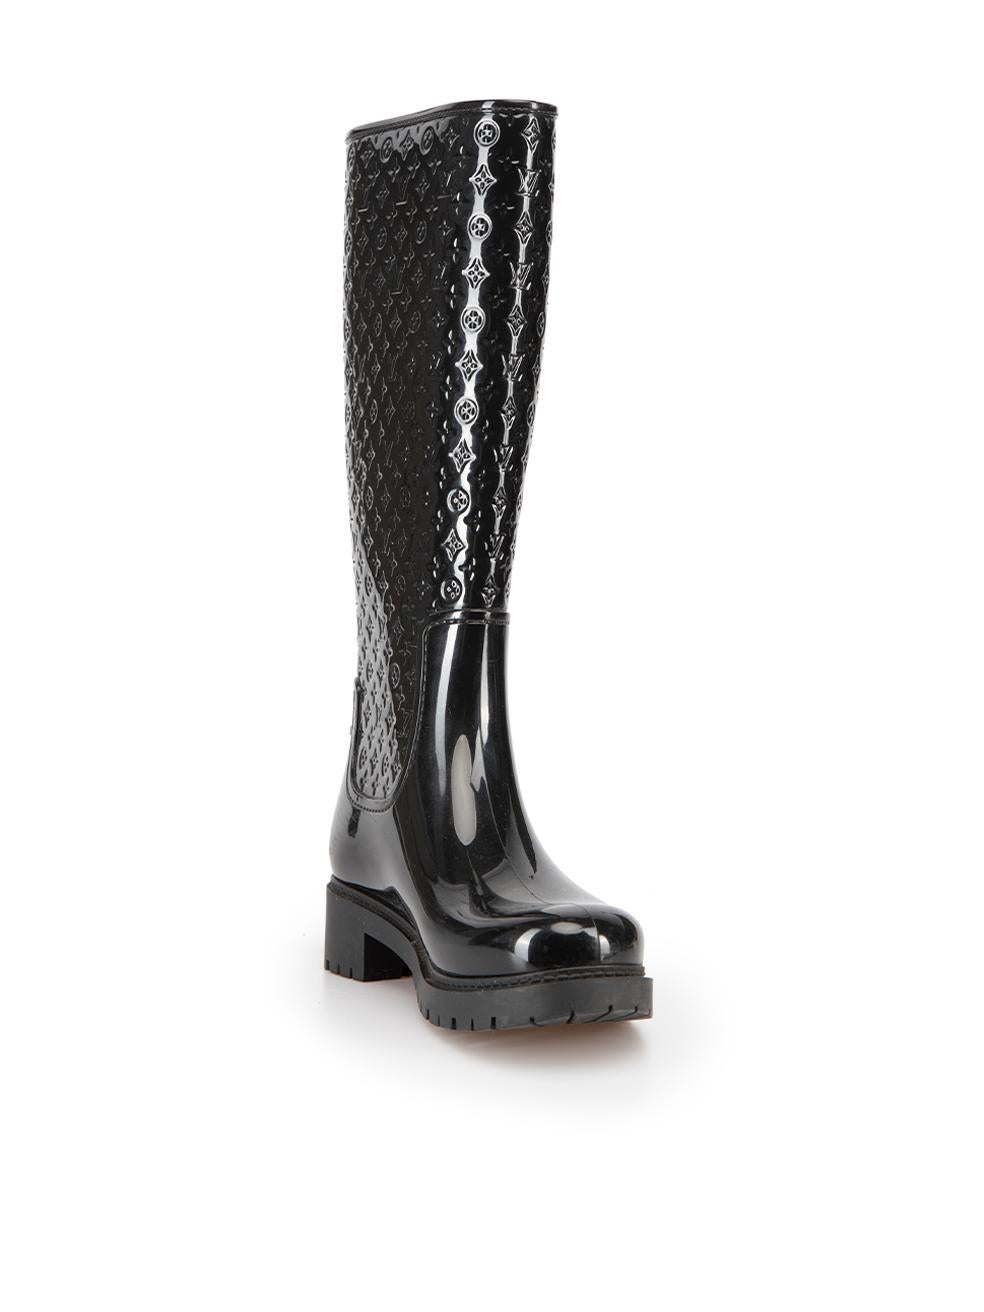 CONDITION is Very good. Minimal wear to boots is evident. Minimal wear to the right-side of left boot and the left-side of right boot with faint scuff marks on this used Louis Vuitton designer resale item. 



Details


Black

Rubber

Knee high rain